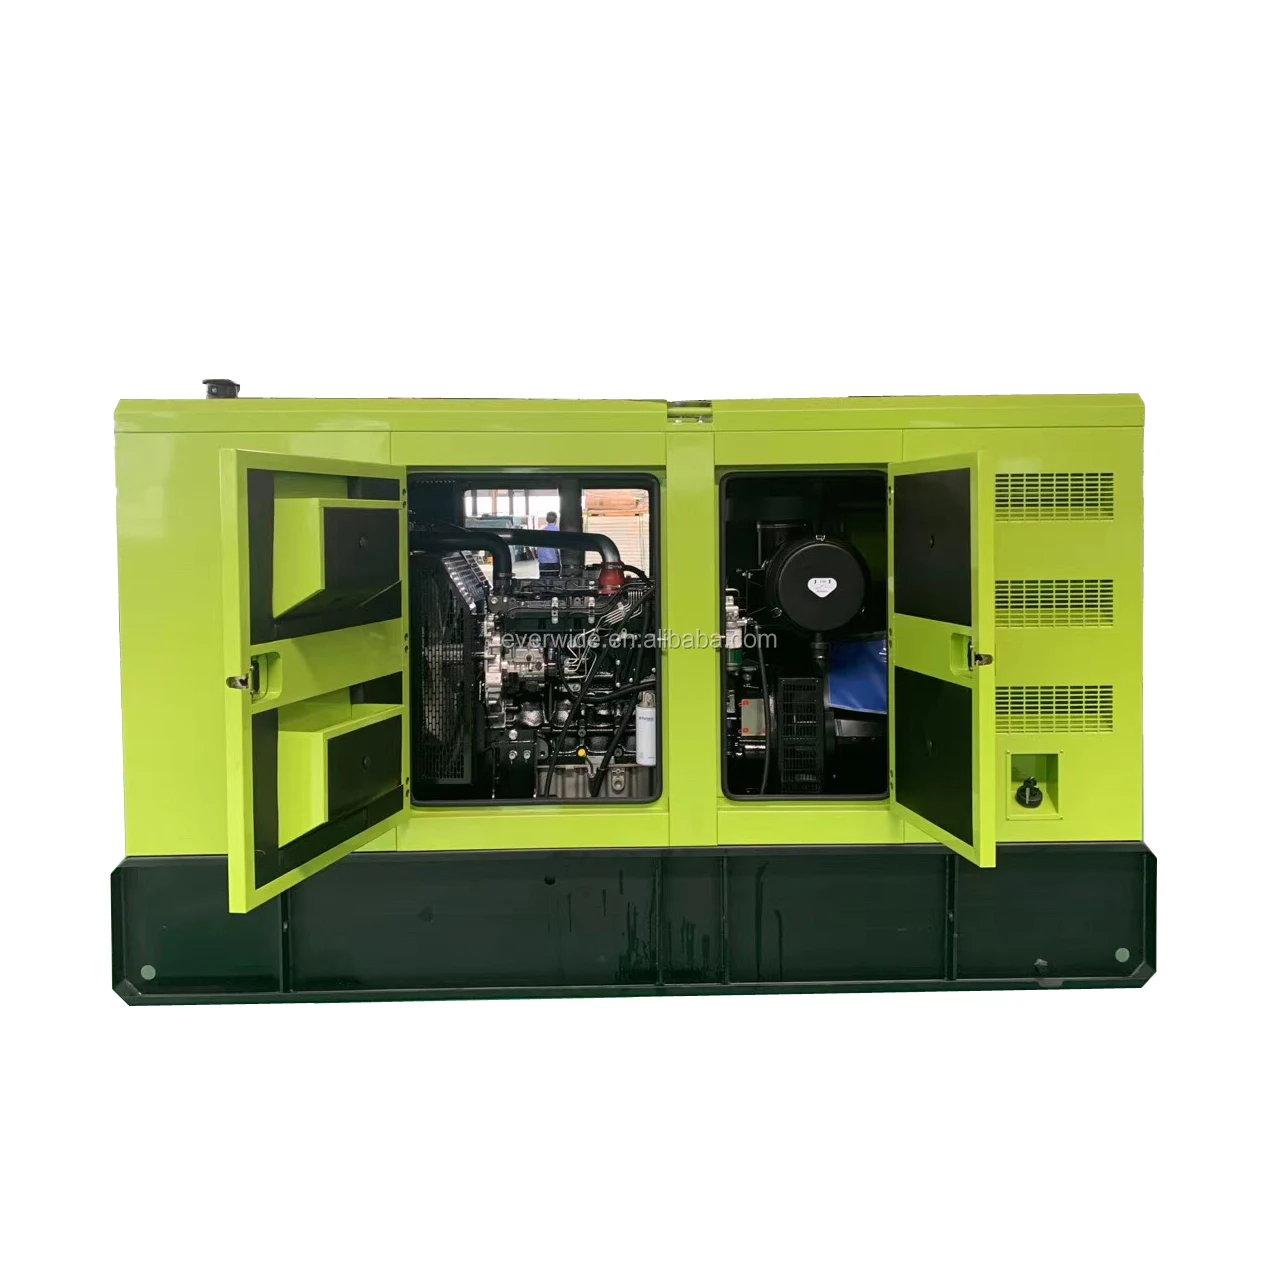 Everwide Power Low Noise Electric Start 15 kw 3 Phase Generator